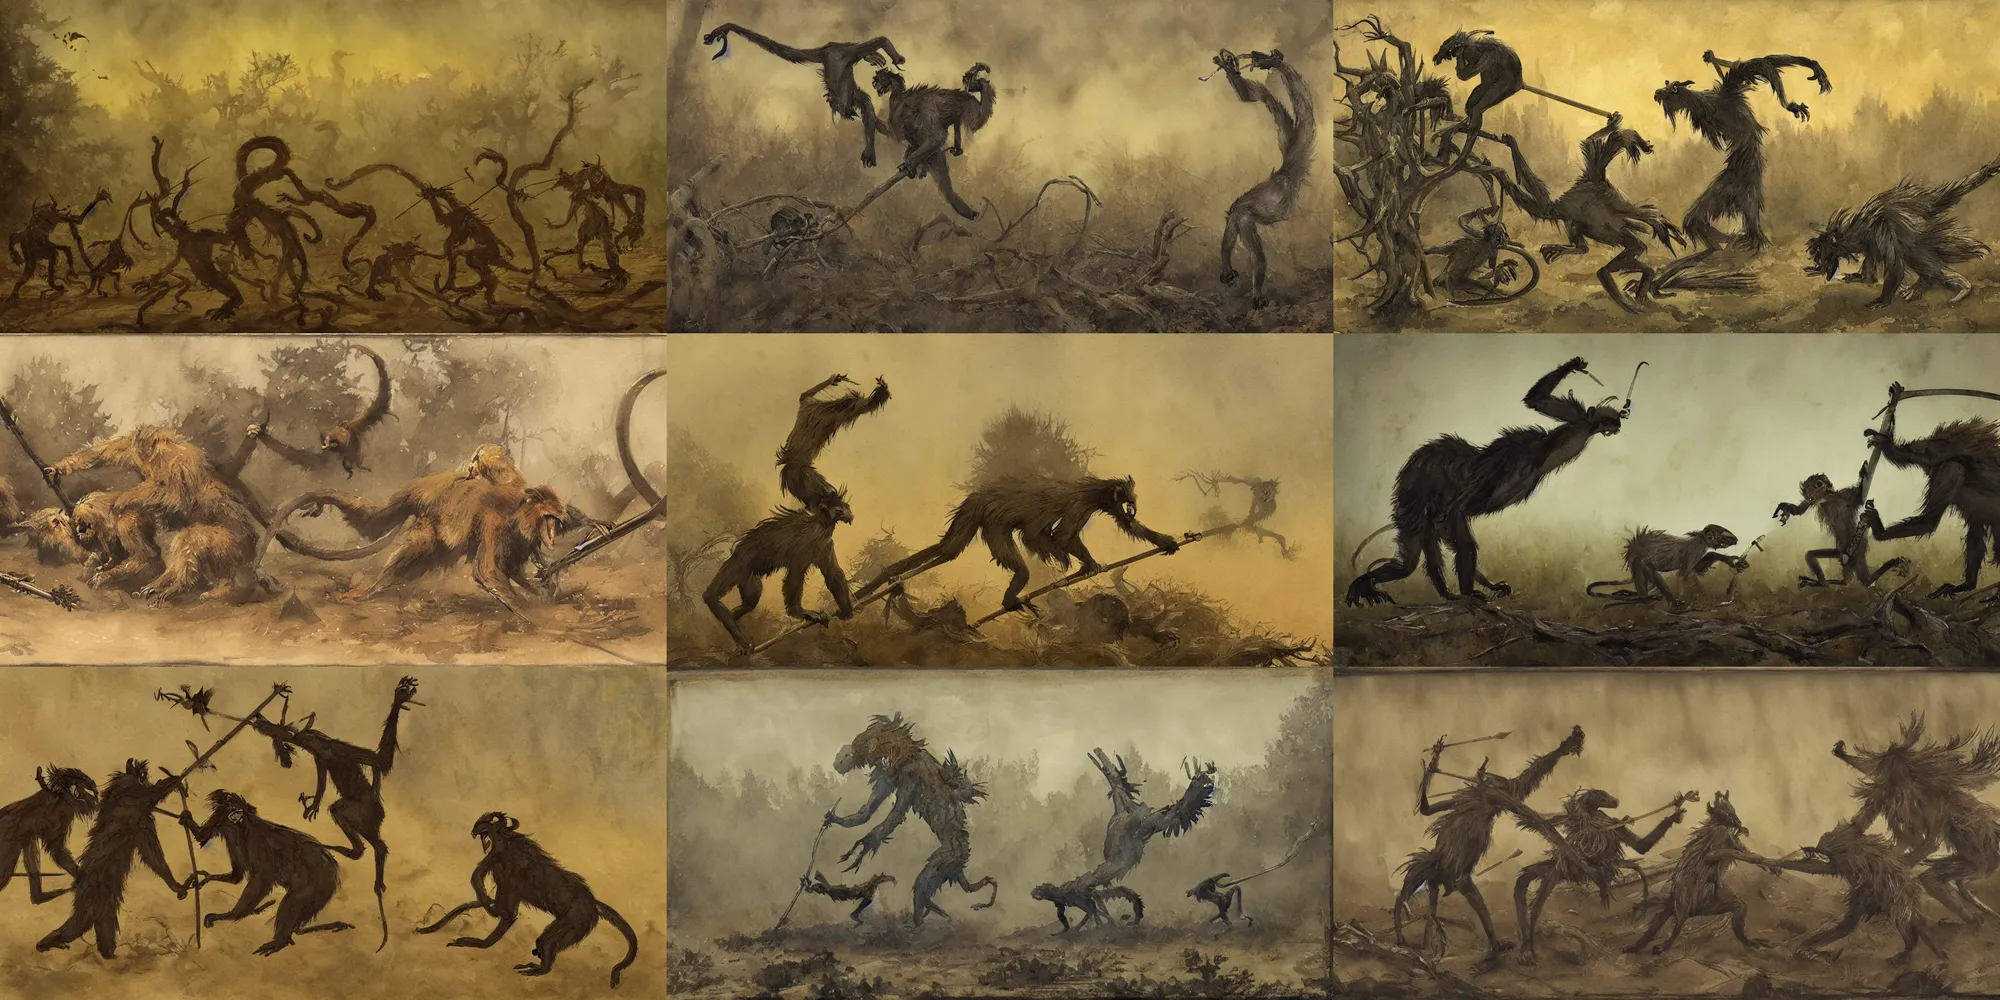 Prompt: battle scene with squabbling long - eared crow - monkeys with pitchforks fighting a juniper - bear monster creature | tonalist, art nouveau, inks, watercolor wash, chiaroscuro, grisaille, mud, high contrast, backlighting, dust, golden hour